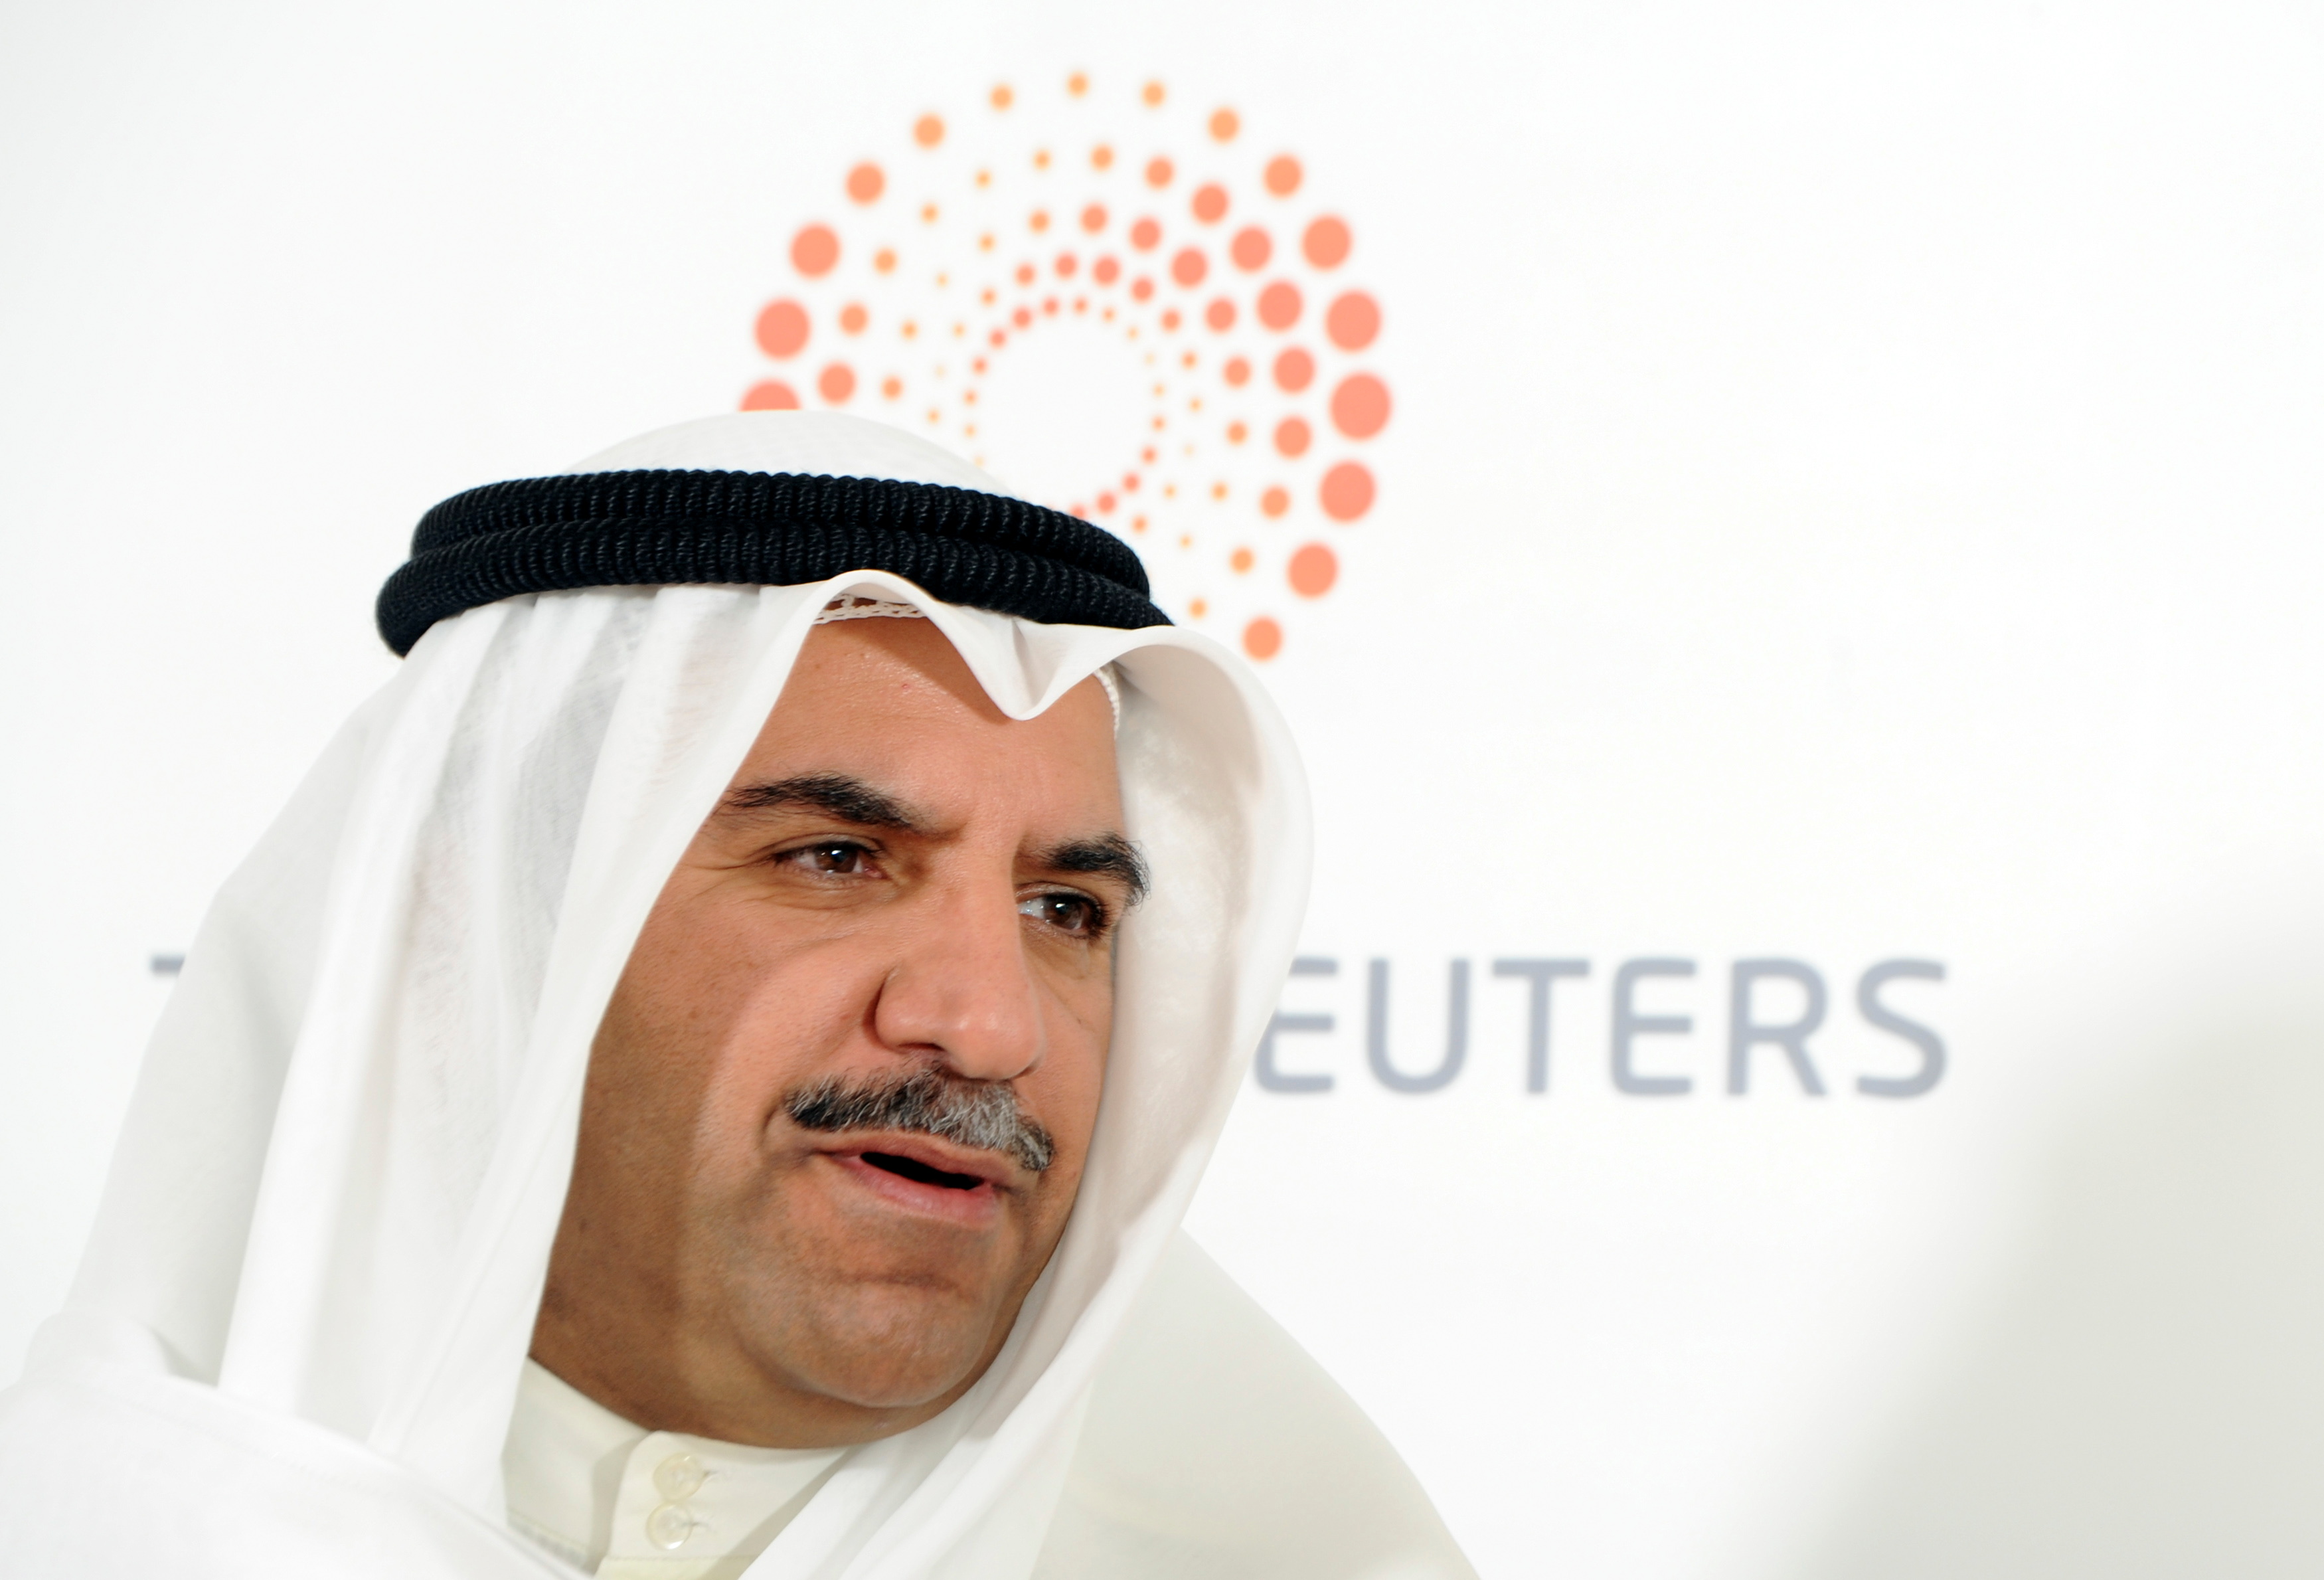 Chairman of Jazeera Airways Boodai speaks during Reuters Middle East Investment Summit in Kuwait City